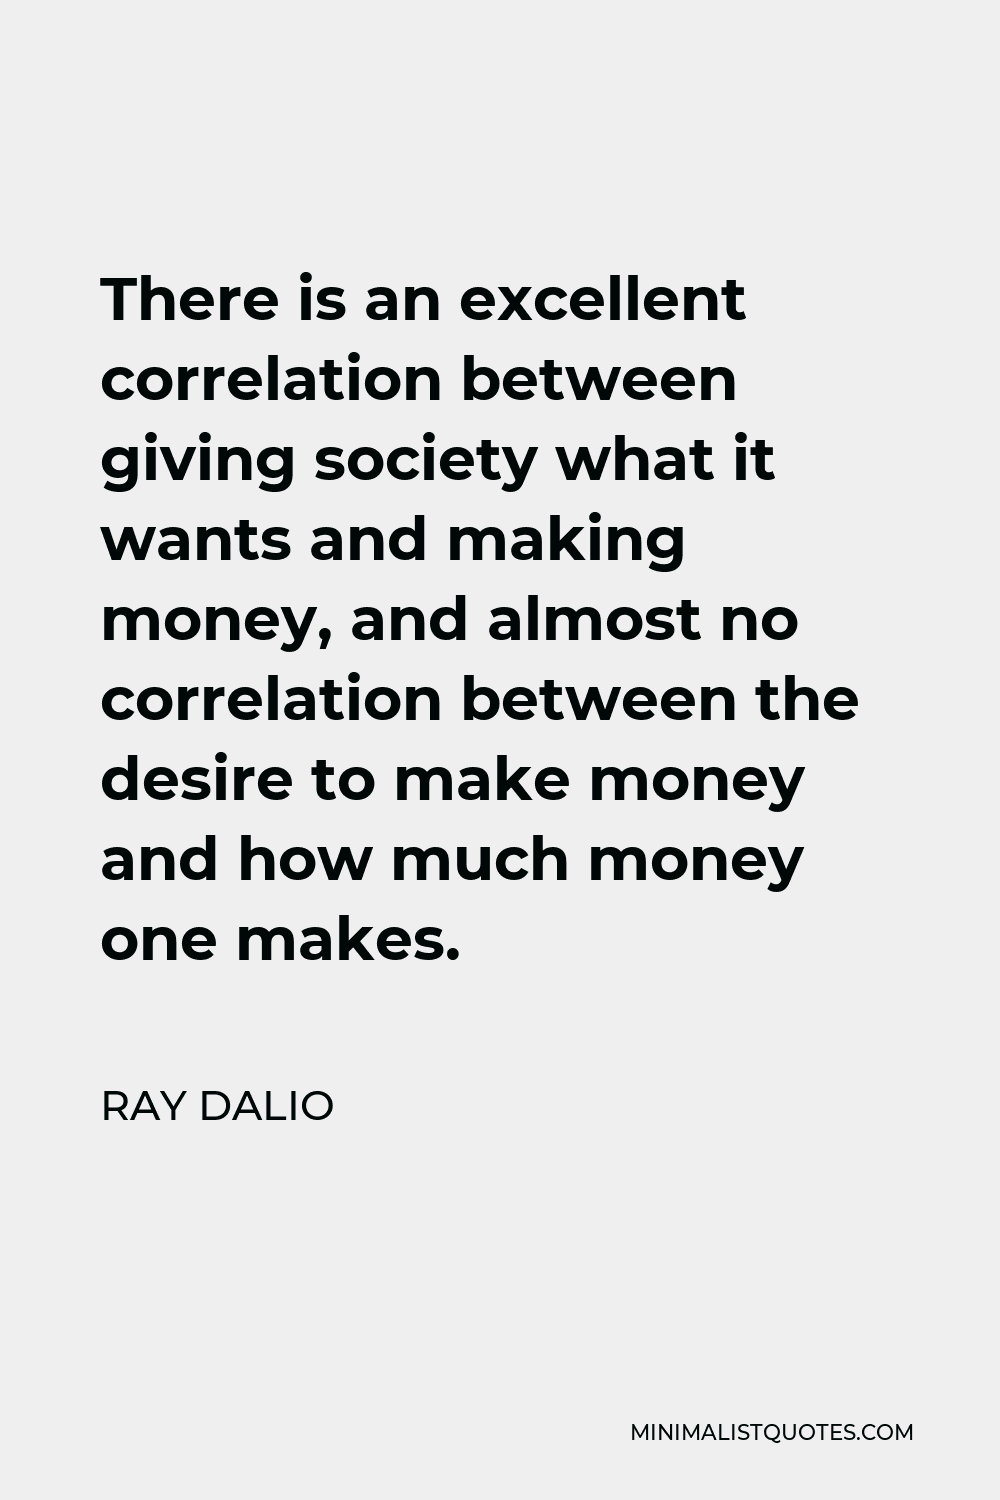 Ray Dalio Quote - There is an excellent correlation between giving society what it wants and making money, and almost no correlation between the desire to make money and how much money one makes.